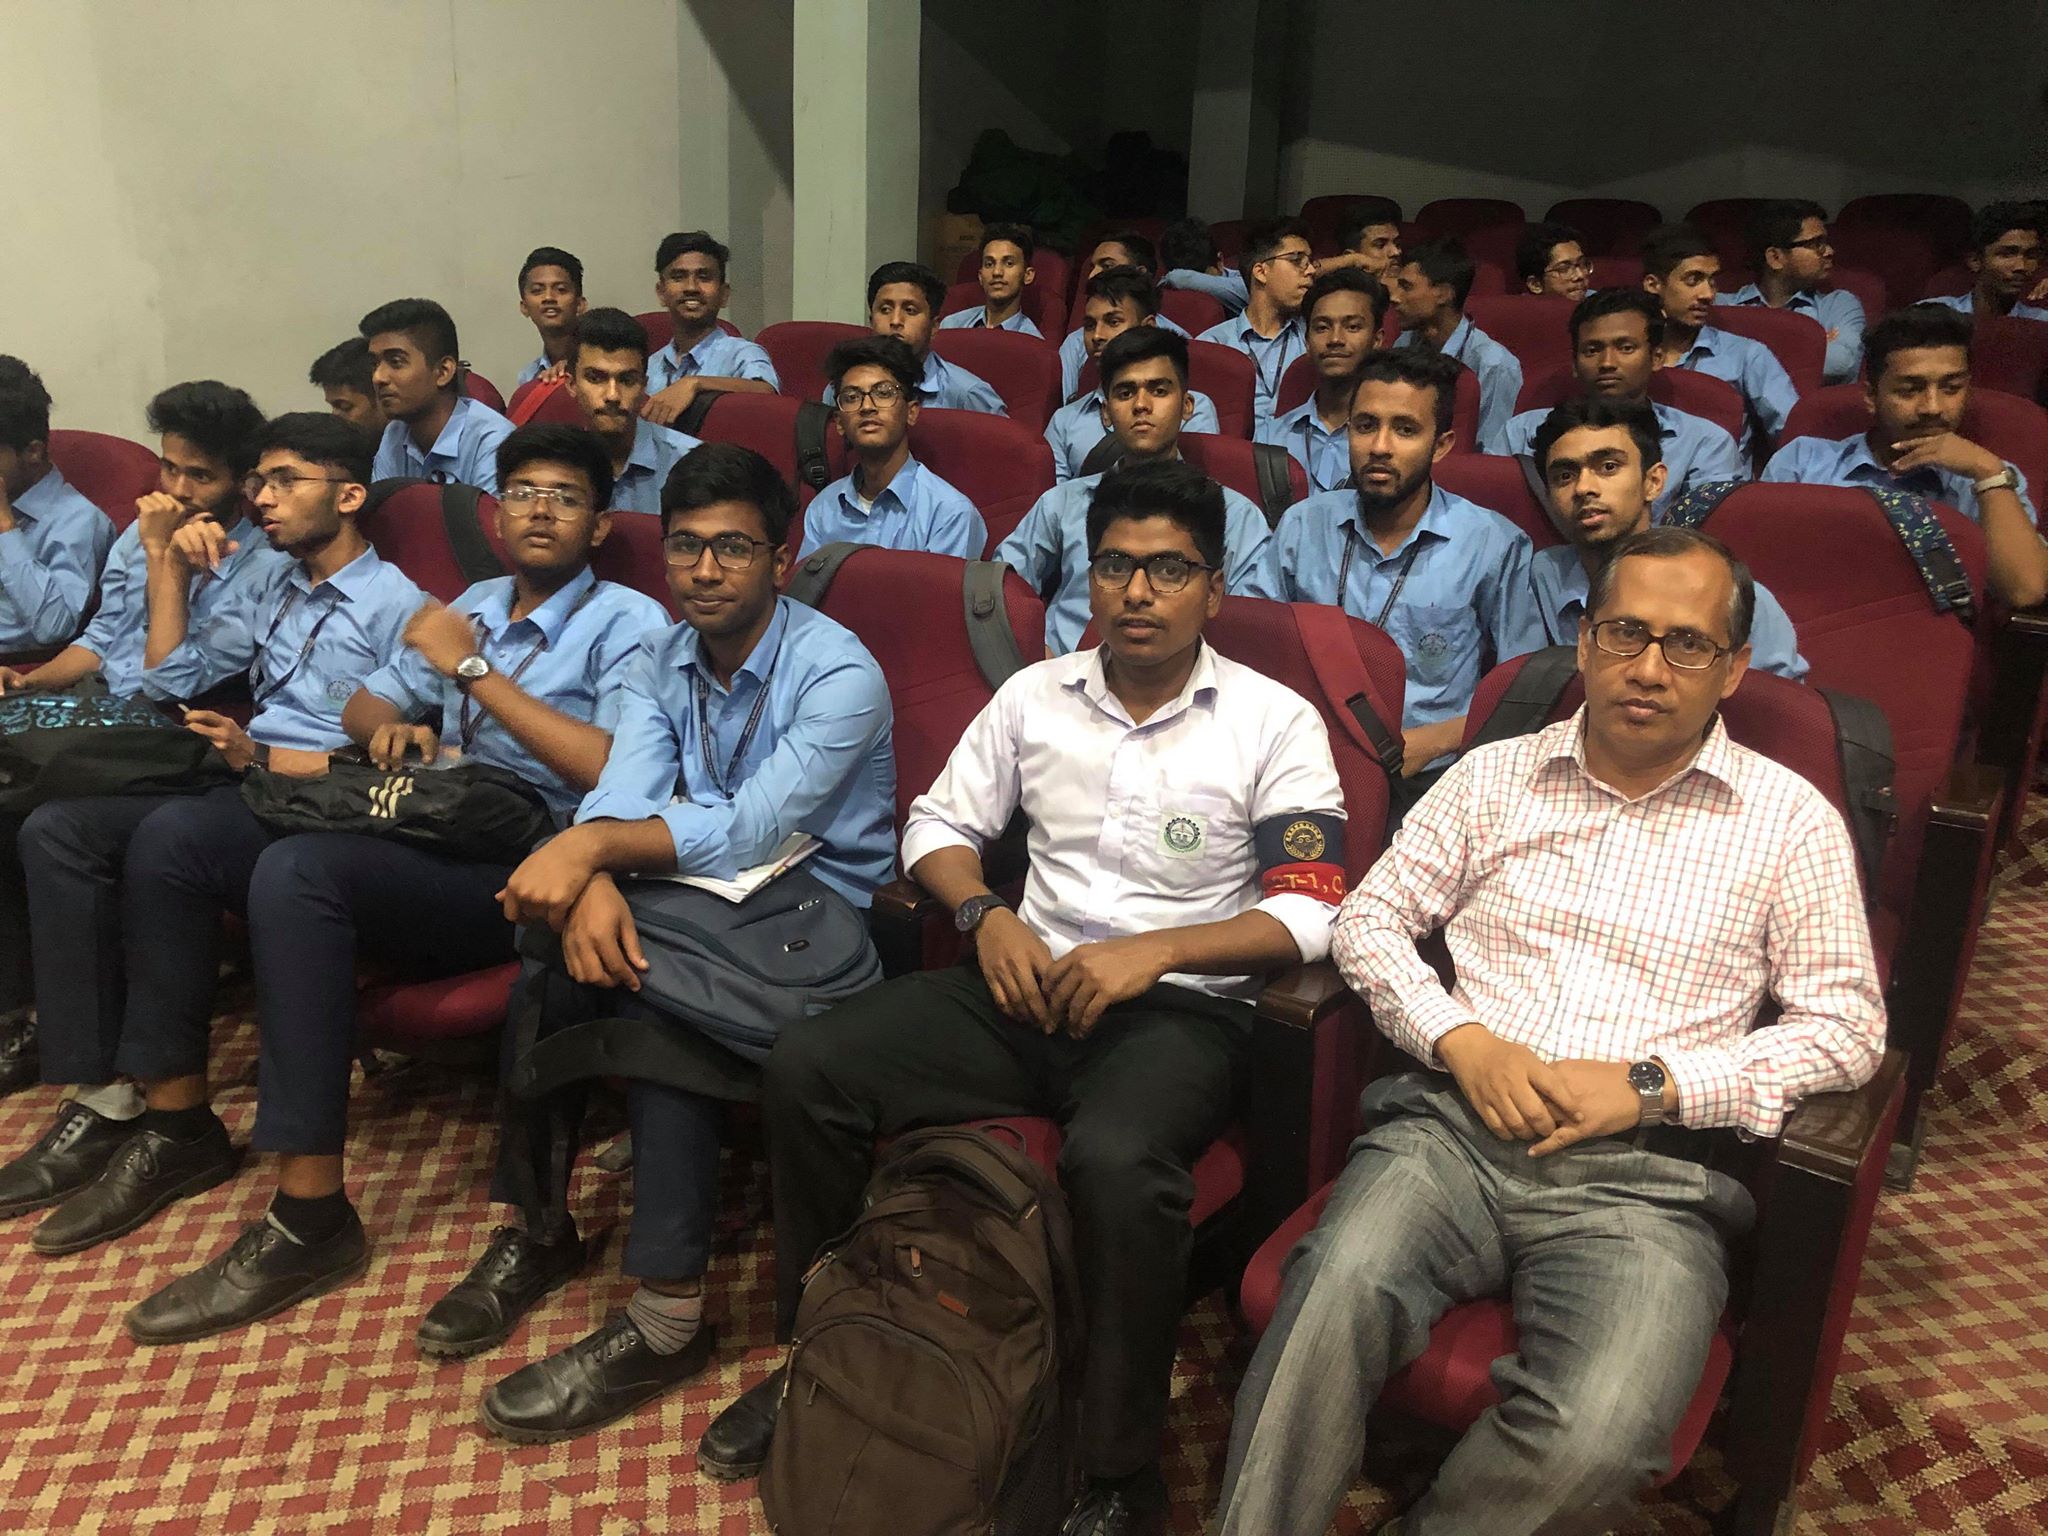 Debators of DCC team, the Runner Up in the Independence Day Debating Competition jointly organized by Debate for Democracy and ATN Bangla on 23 Feb